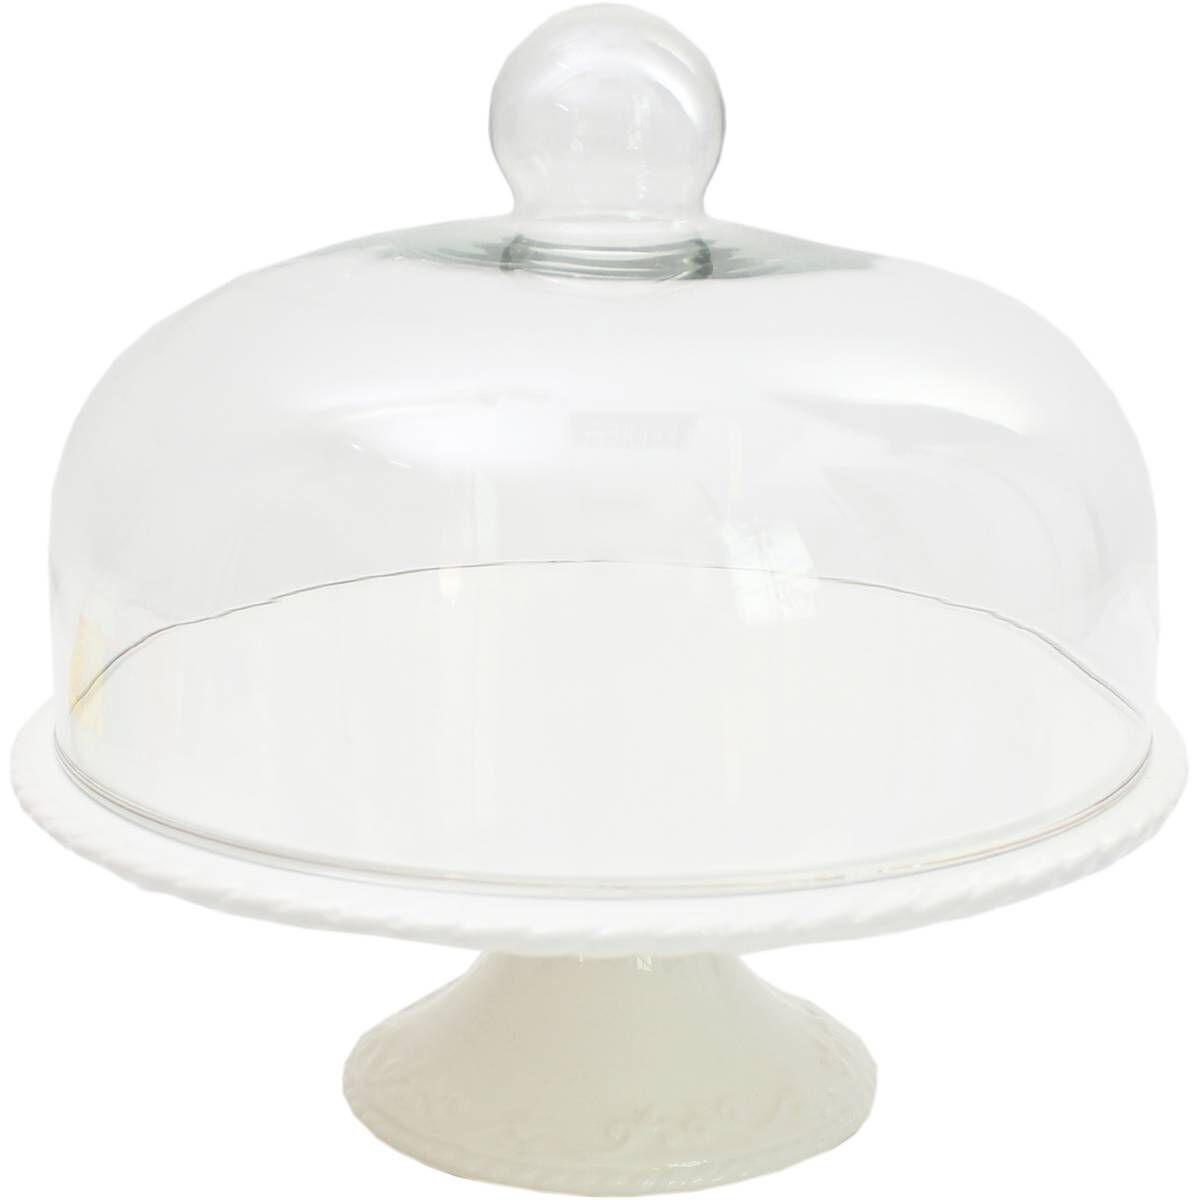 Medium Display Cake Stand With Glass Dome Cover / Tall 33 cm